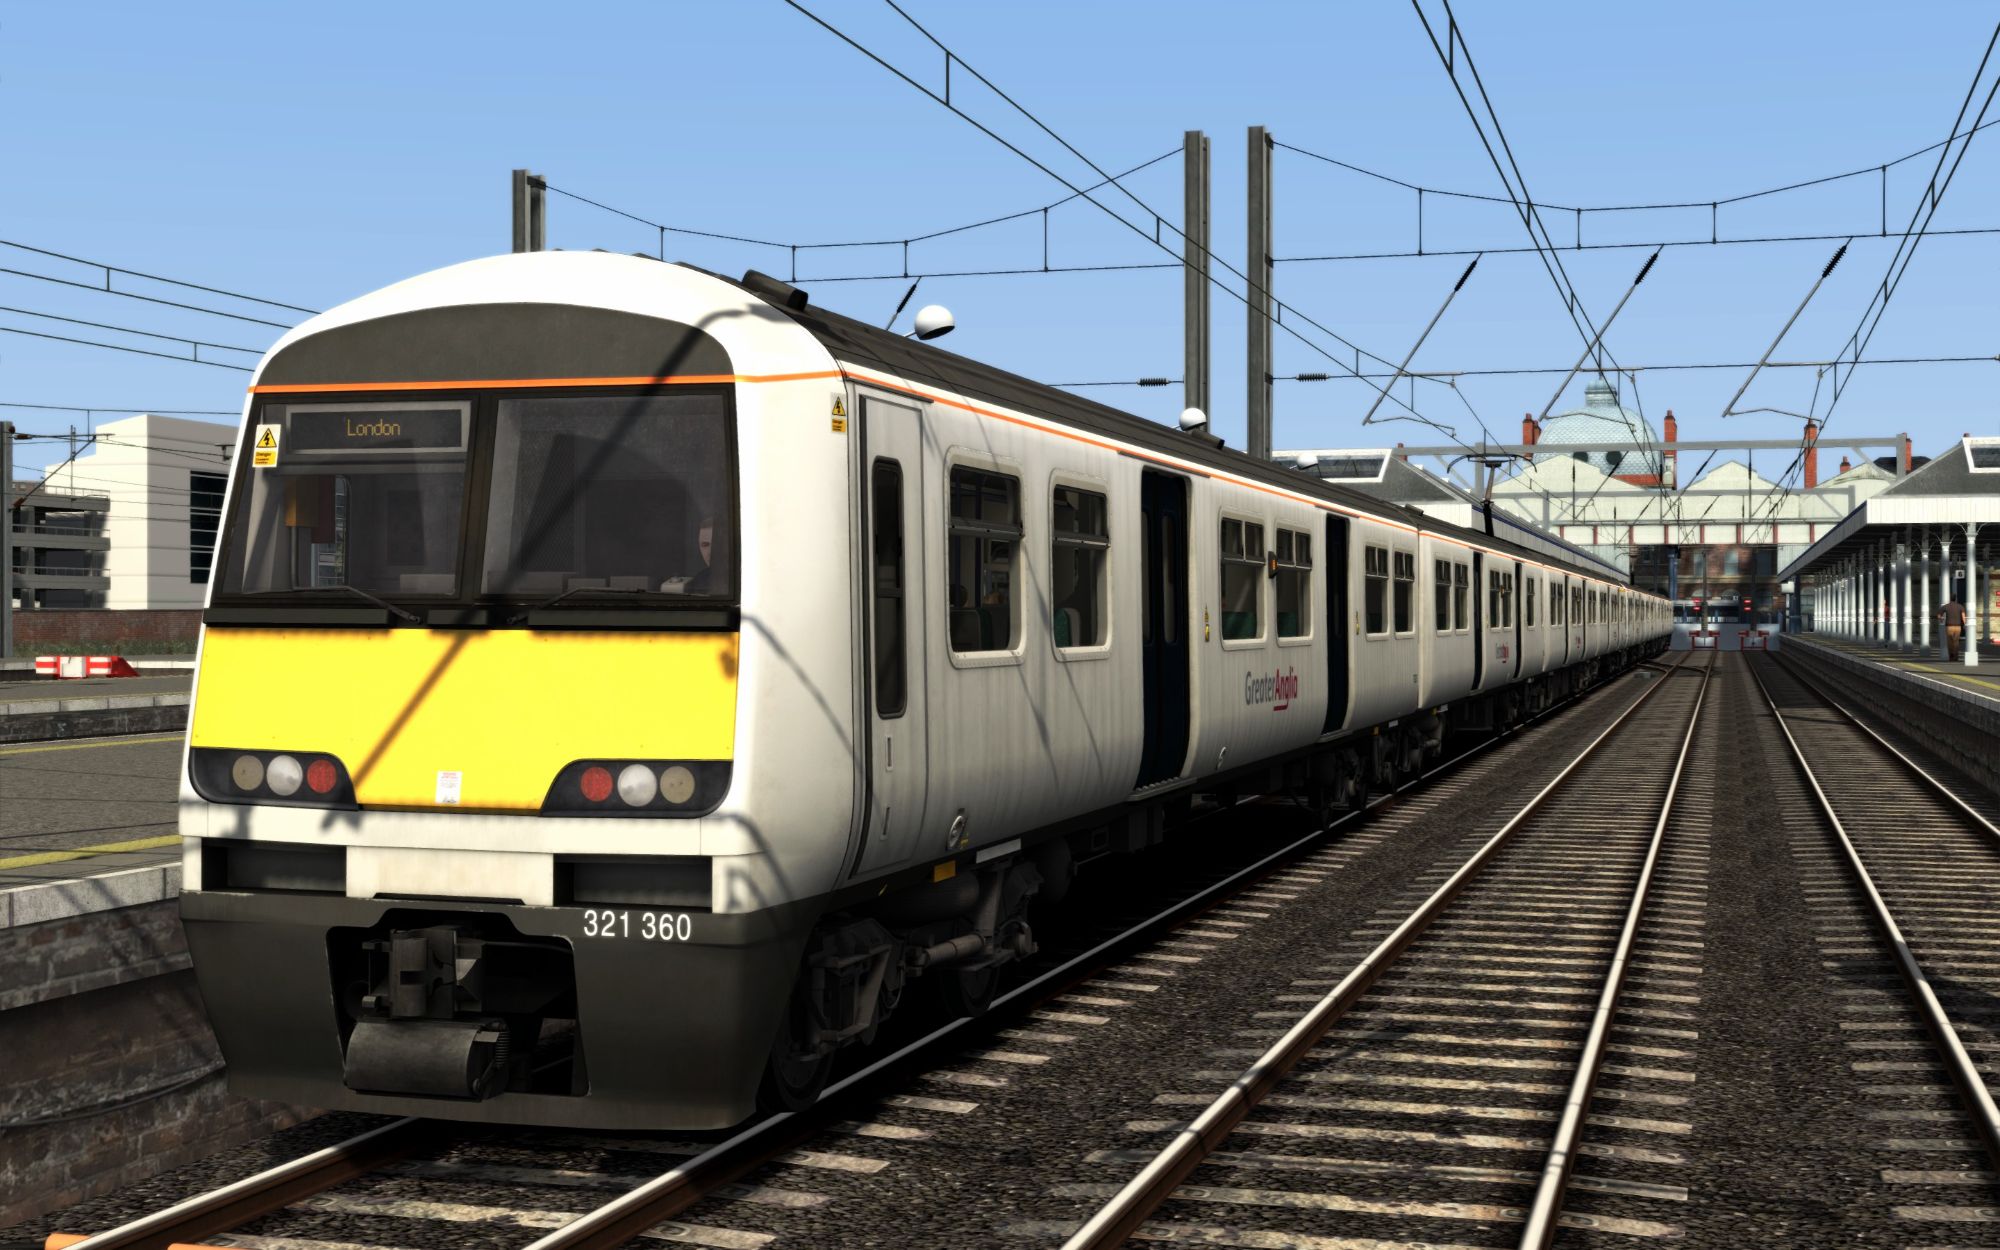 Image showing screenshot of the 1P23 - 0900 Norwich to London Liverpool Street scenario